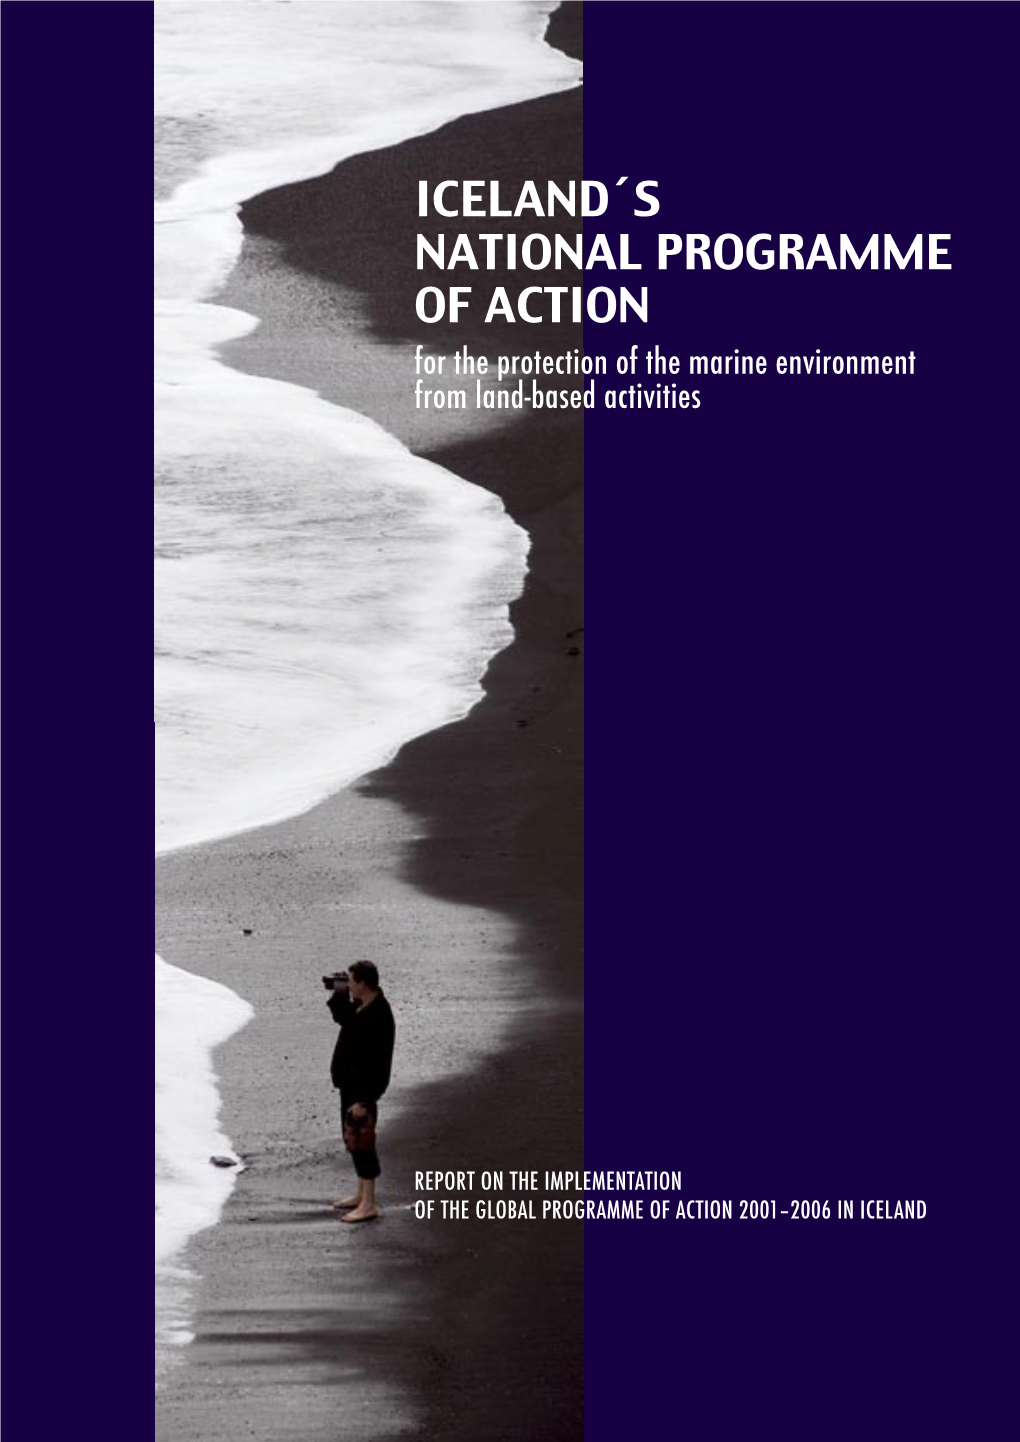 ICELAND´S NATIONAL PROGRAMME of ACTION for the Protection of the Marine Environment from Land-Based Activities